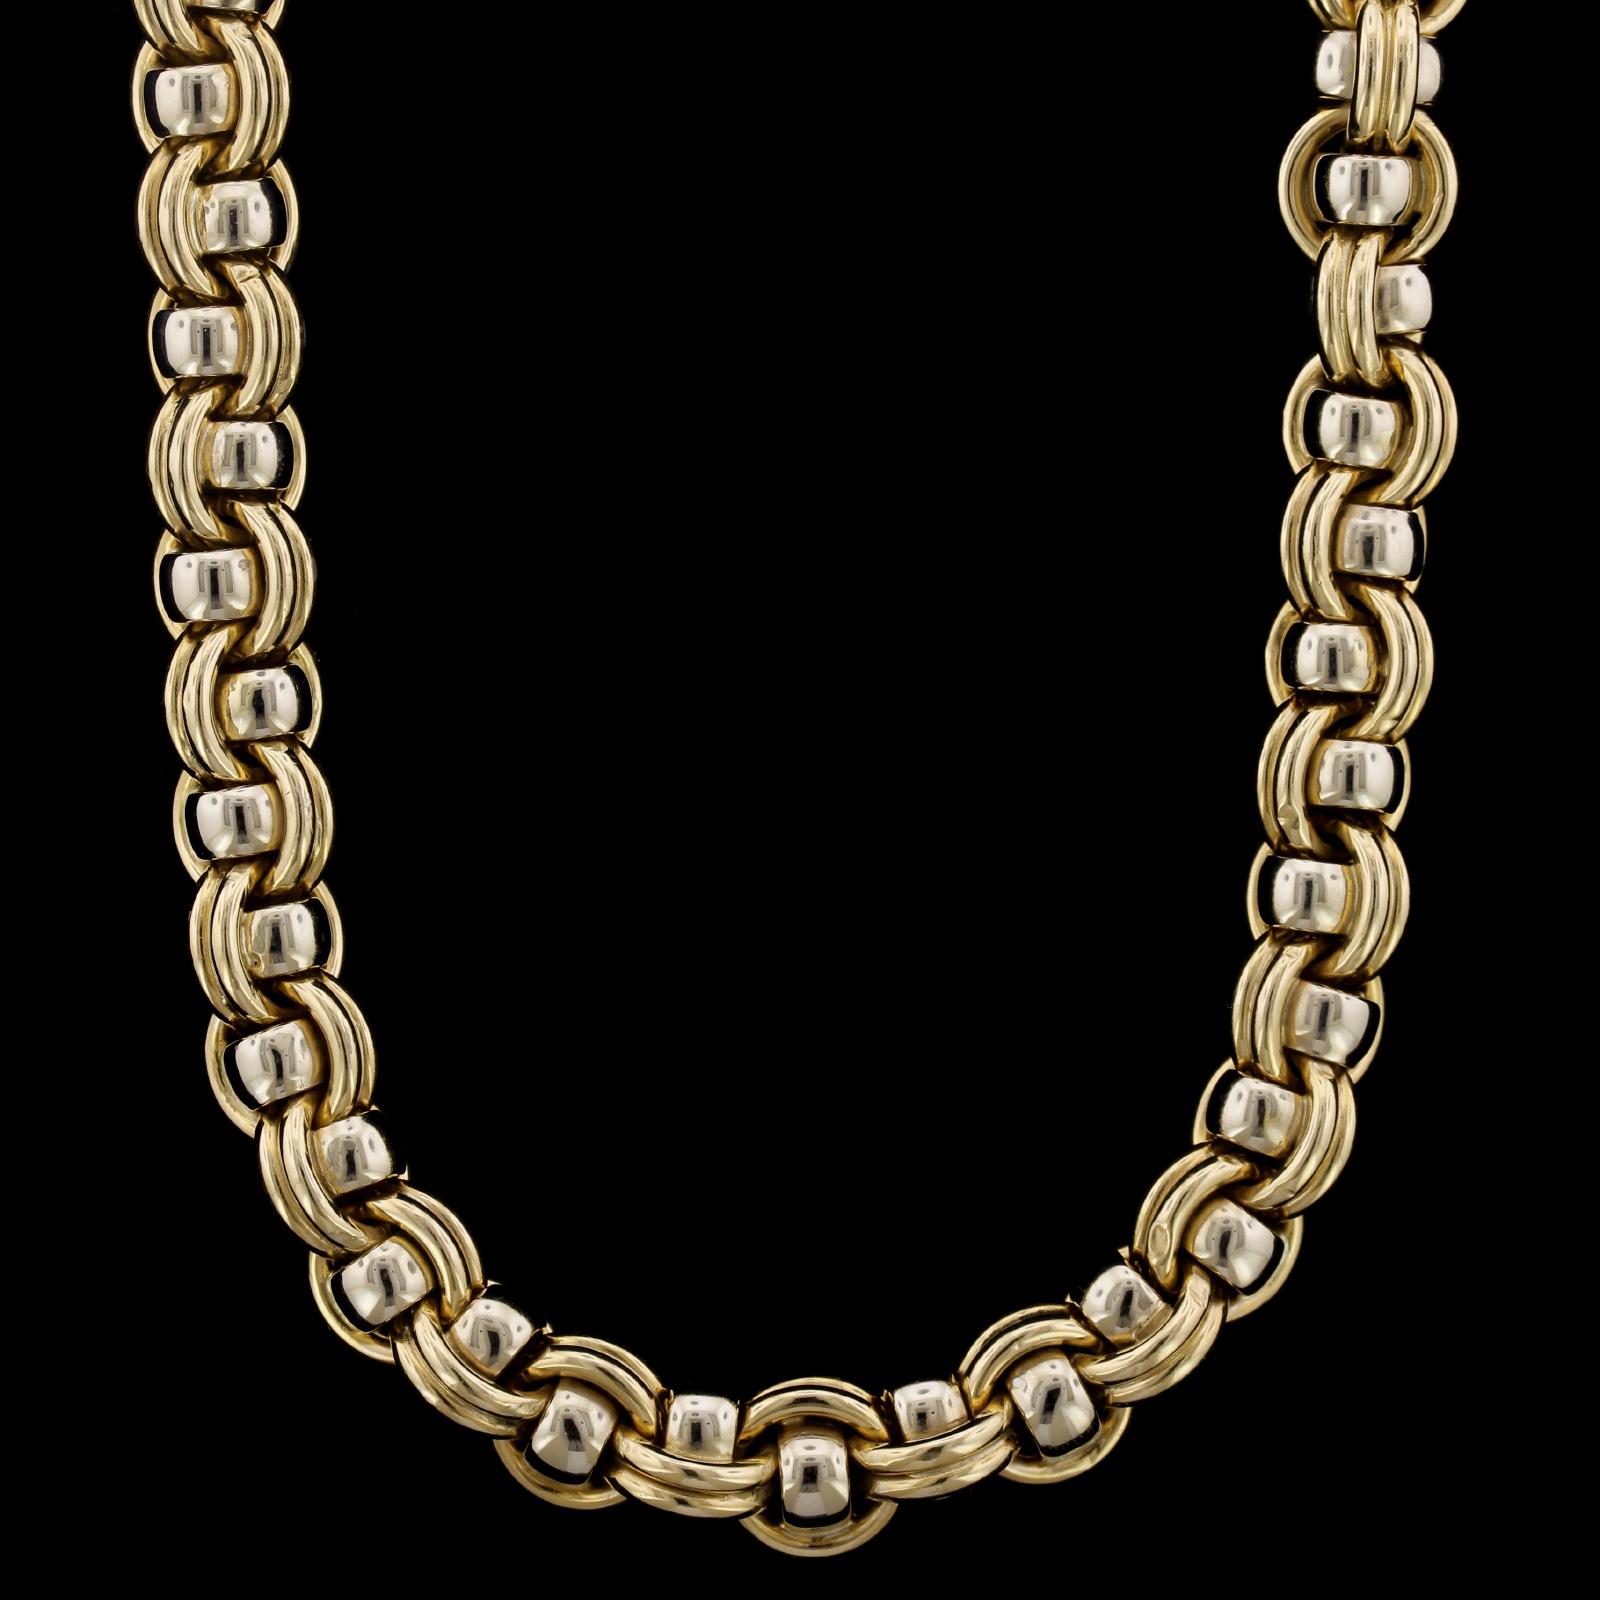 Chaumet 18K Two-tone Gold Necklace, Paris. The necklace is designed with ribbed
and circular polished links, #143075, length 17